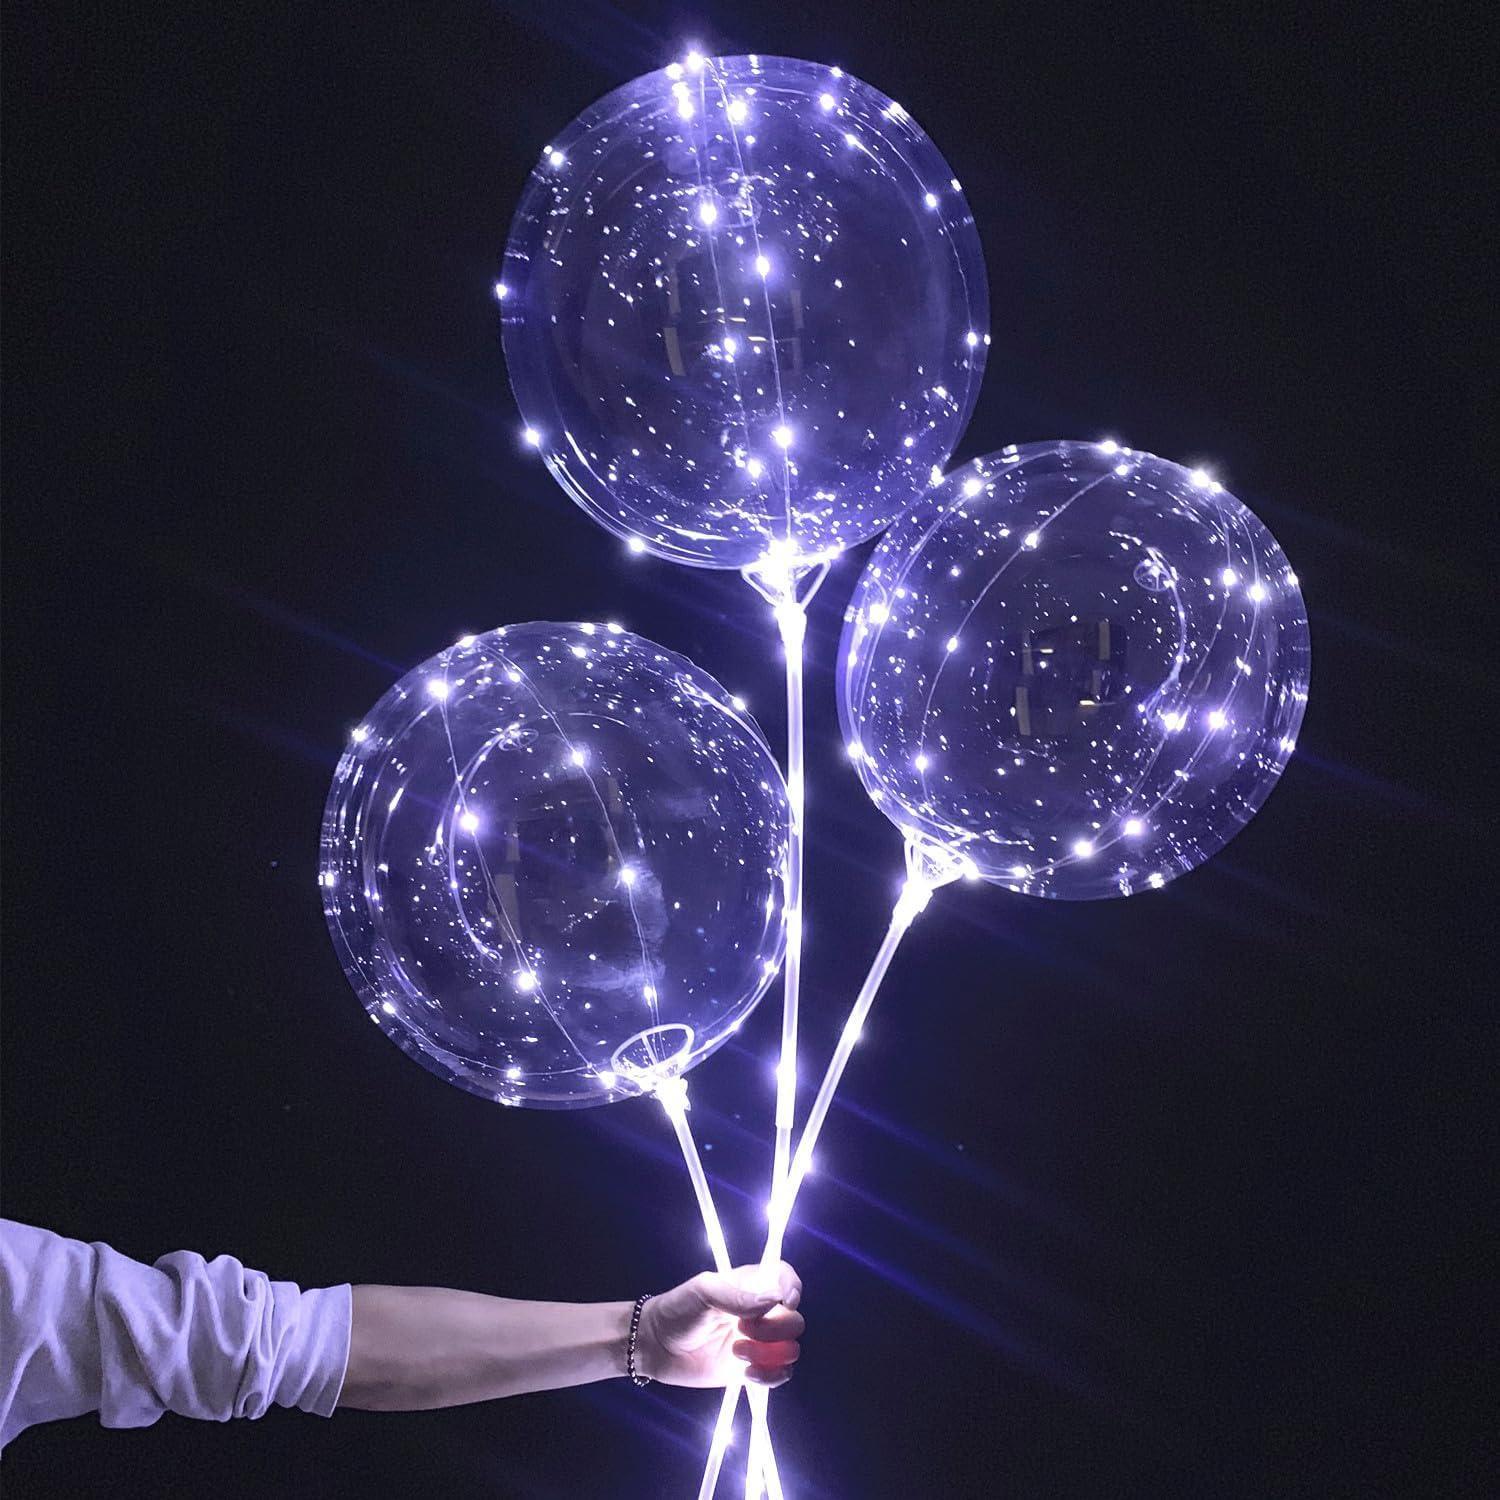 Clear Plastic Balloon Sticks Holder With Cup for Led Balloons